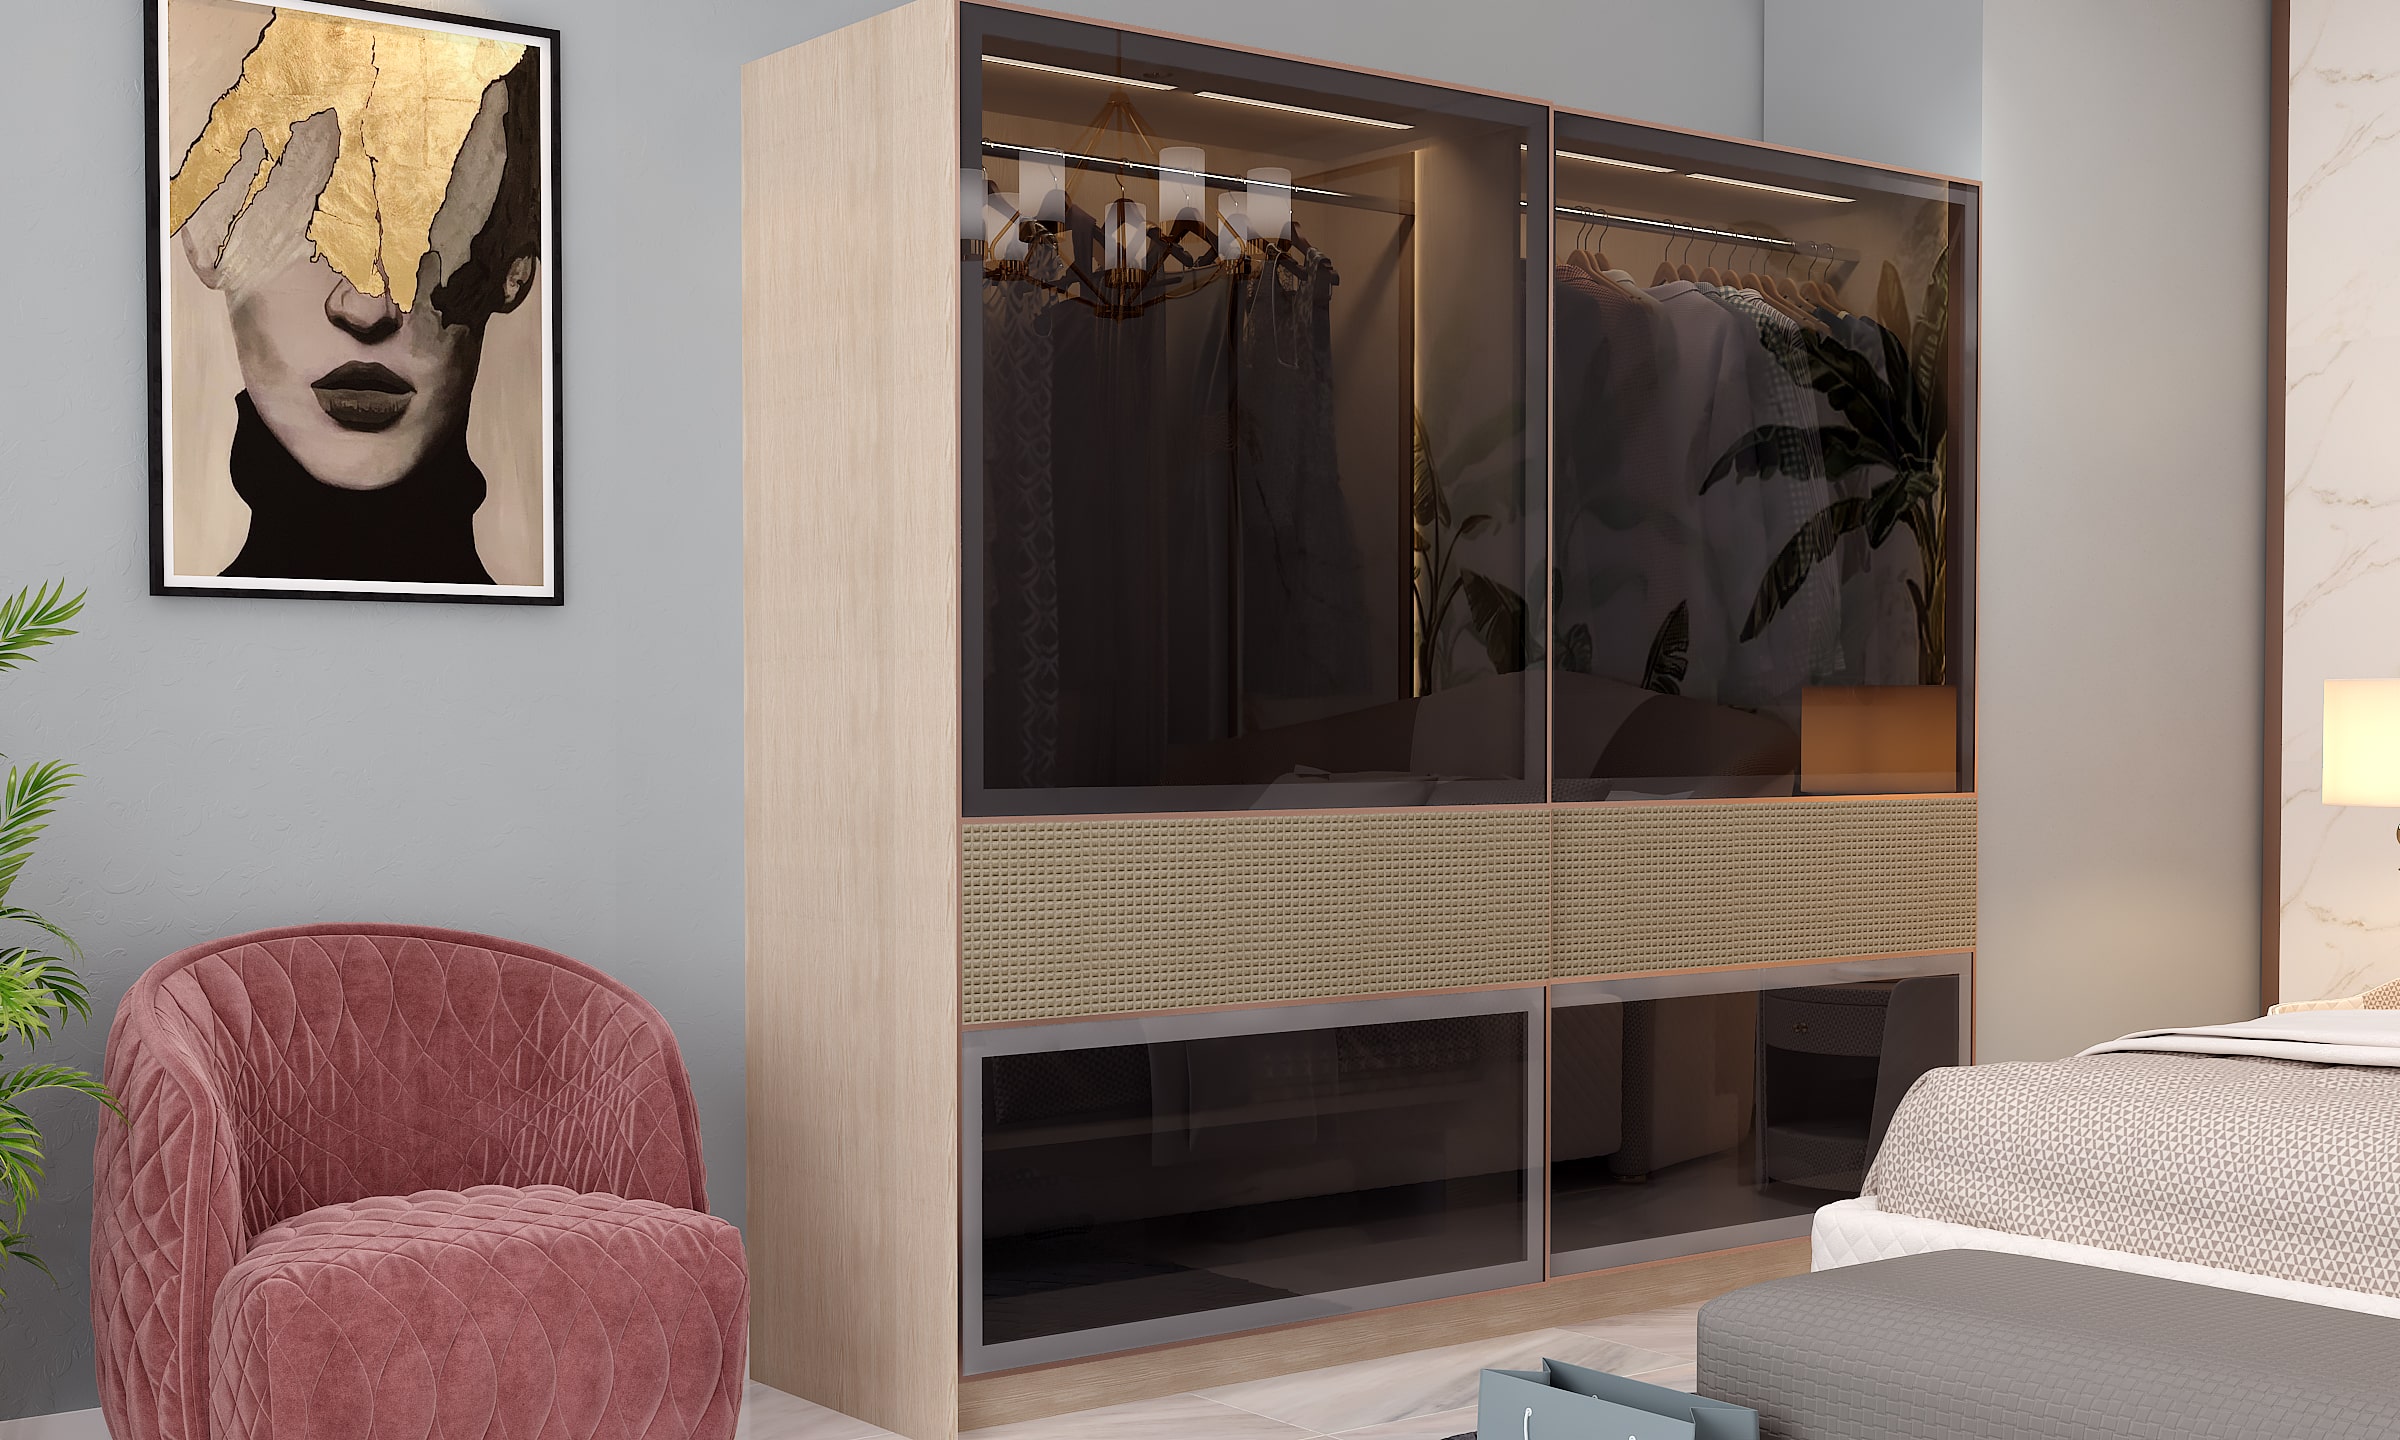 Bedroom luxury house interior with a glass sliding door wardrobe with fabric panels